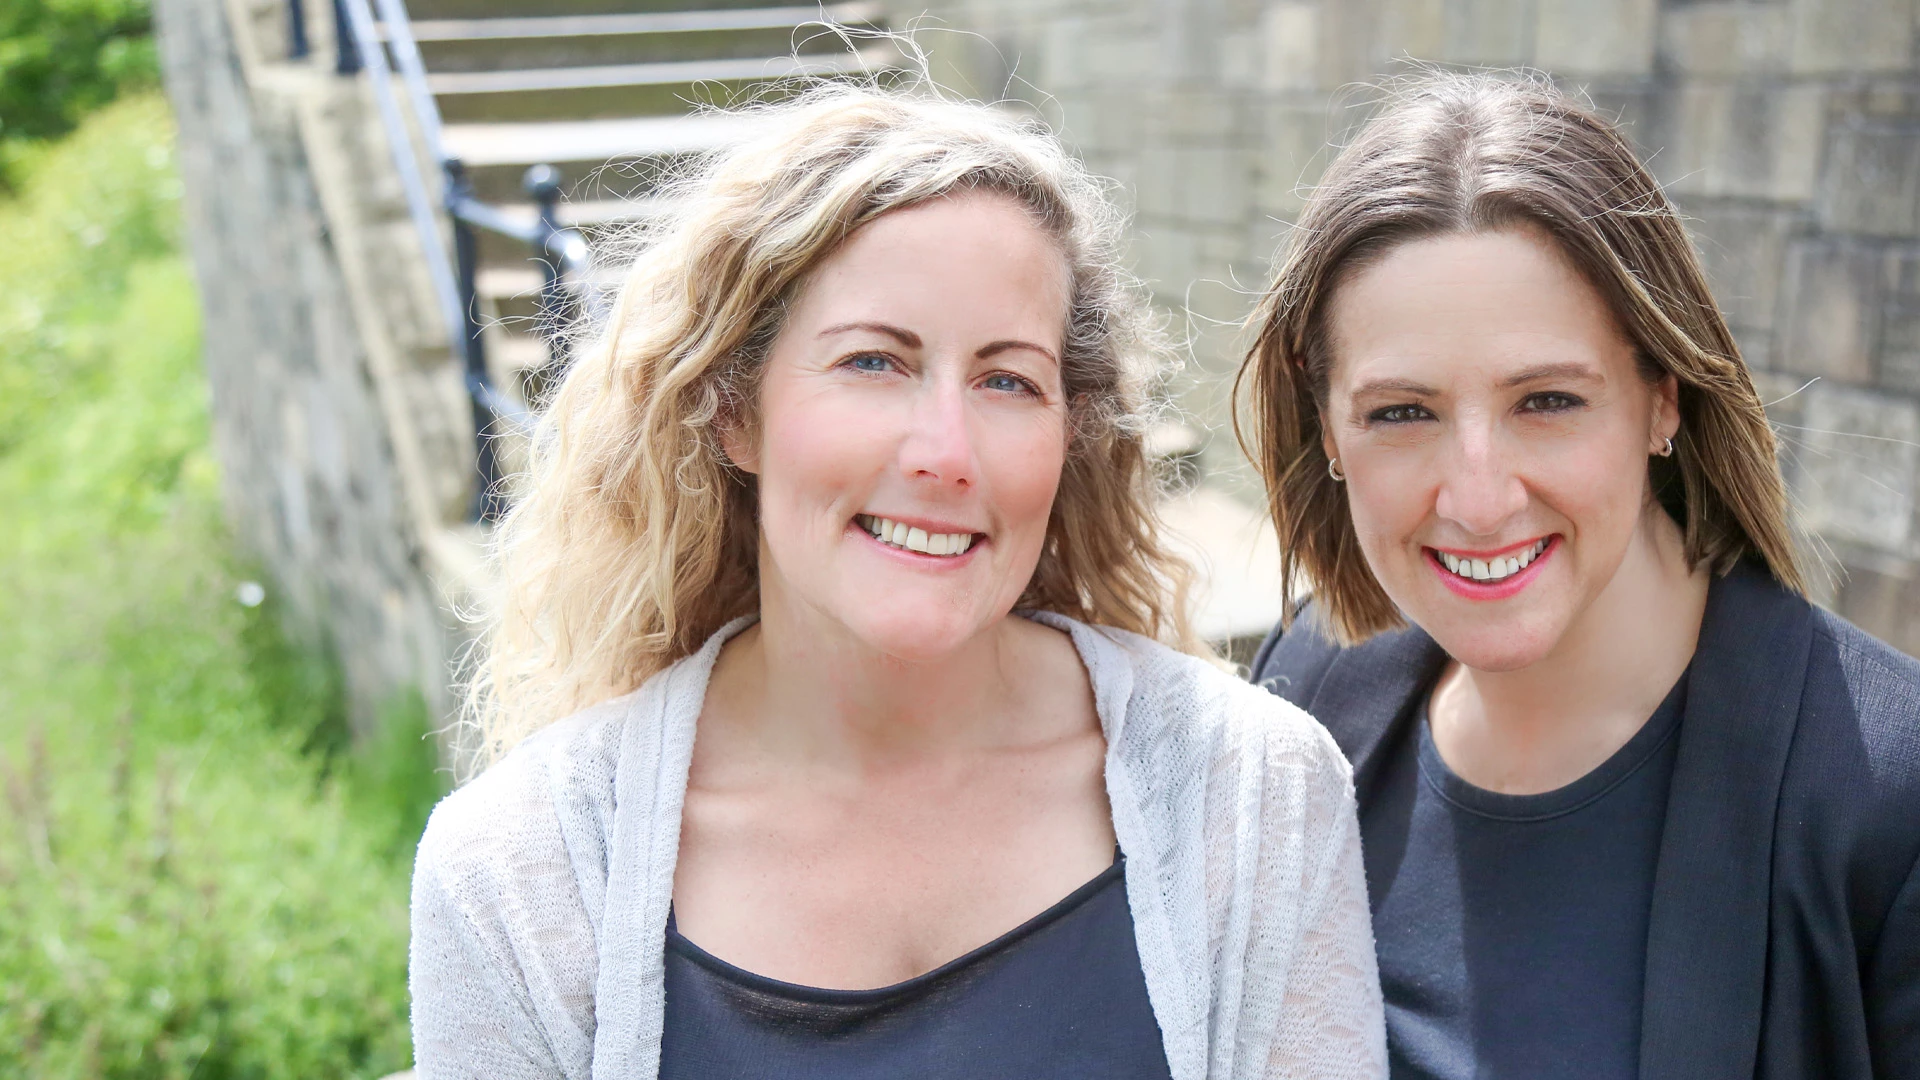 From L To R: Claire Thew And Clare Blunt, Co-Founders Of Venture Zero.